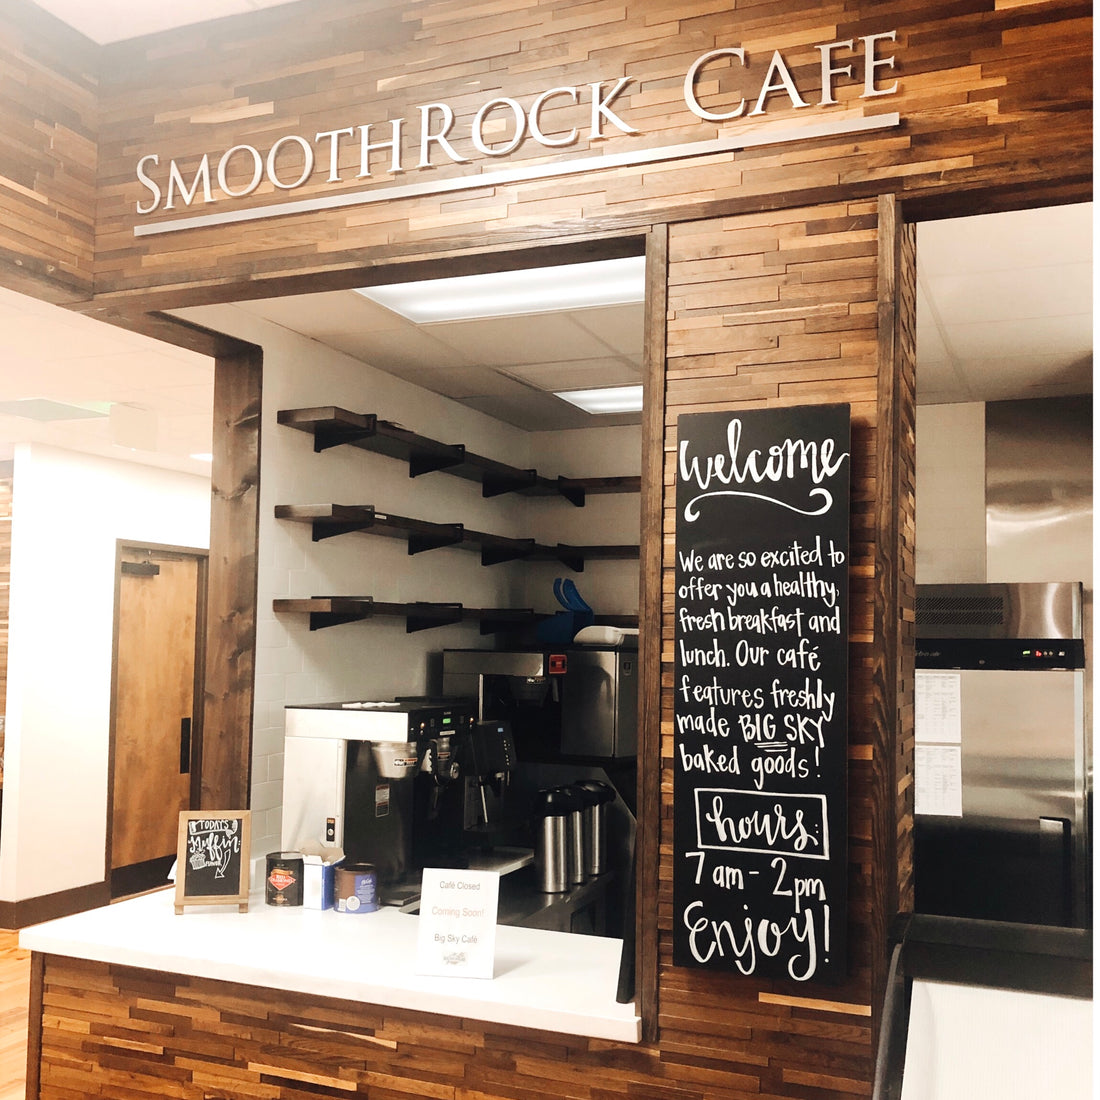 We have some exciting news - Big Sky is opening a cafe featuring fresh Big Sky Bread baked goods right next to our bakery in Liberty Park. The restaurant is called "SmoothRock Cafe" and will operate from 7 am - 2 pm Monday through Friday. 